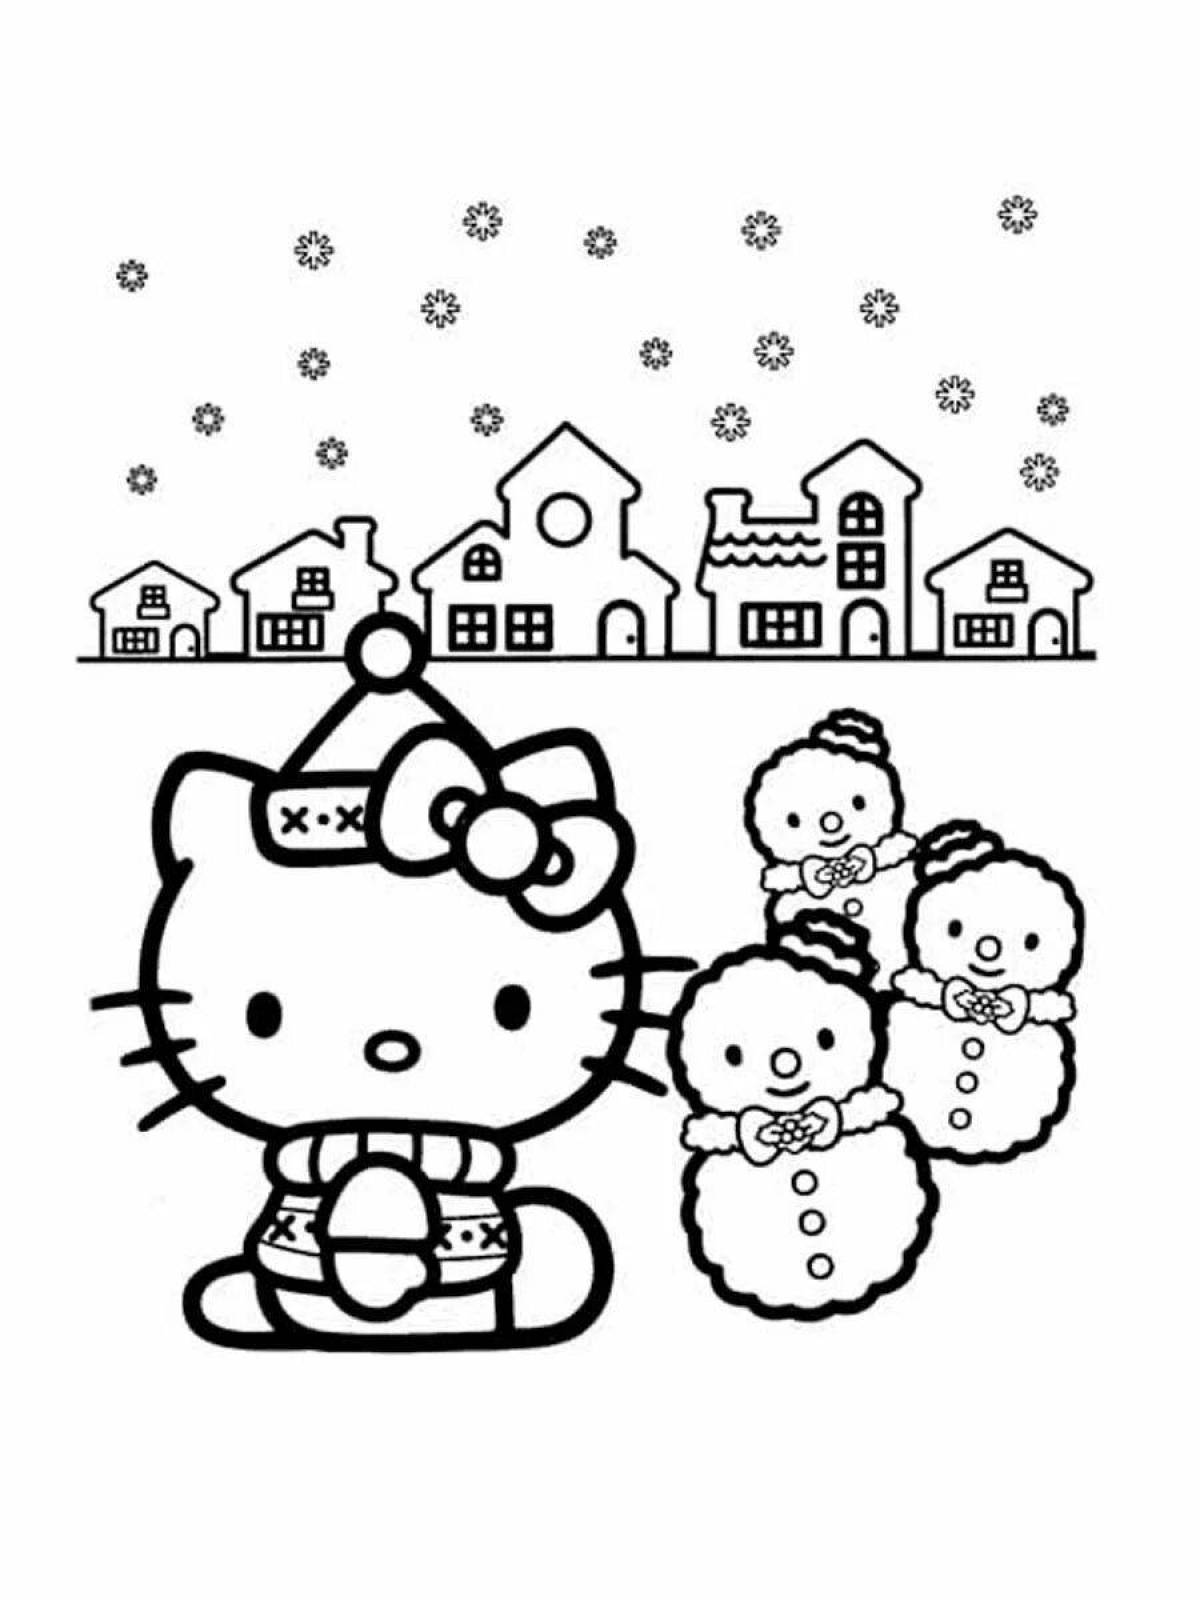 Merry Kitty Christmas coloring book